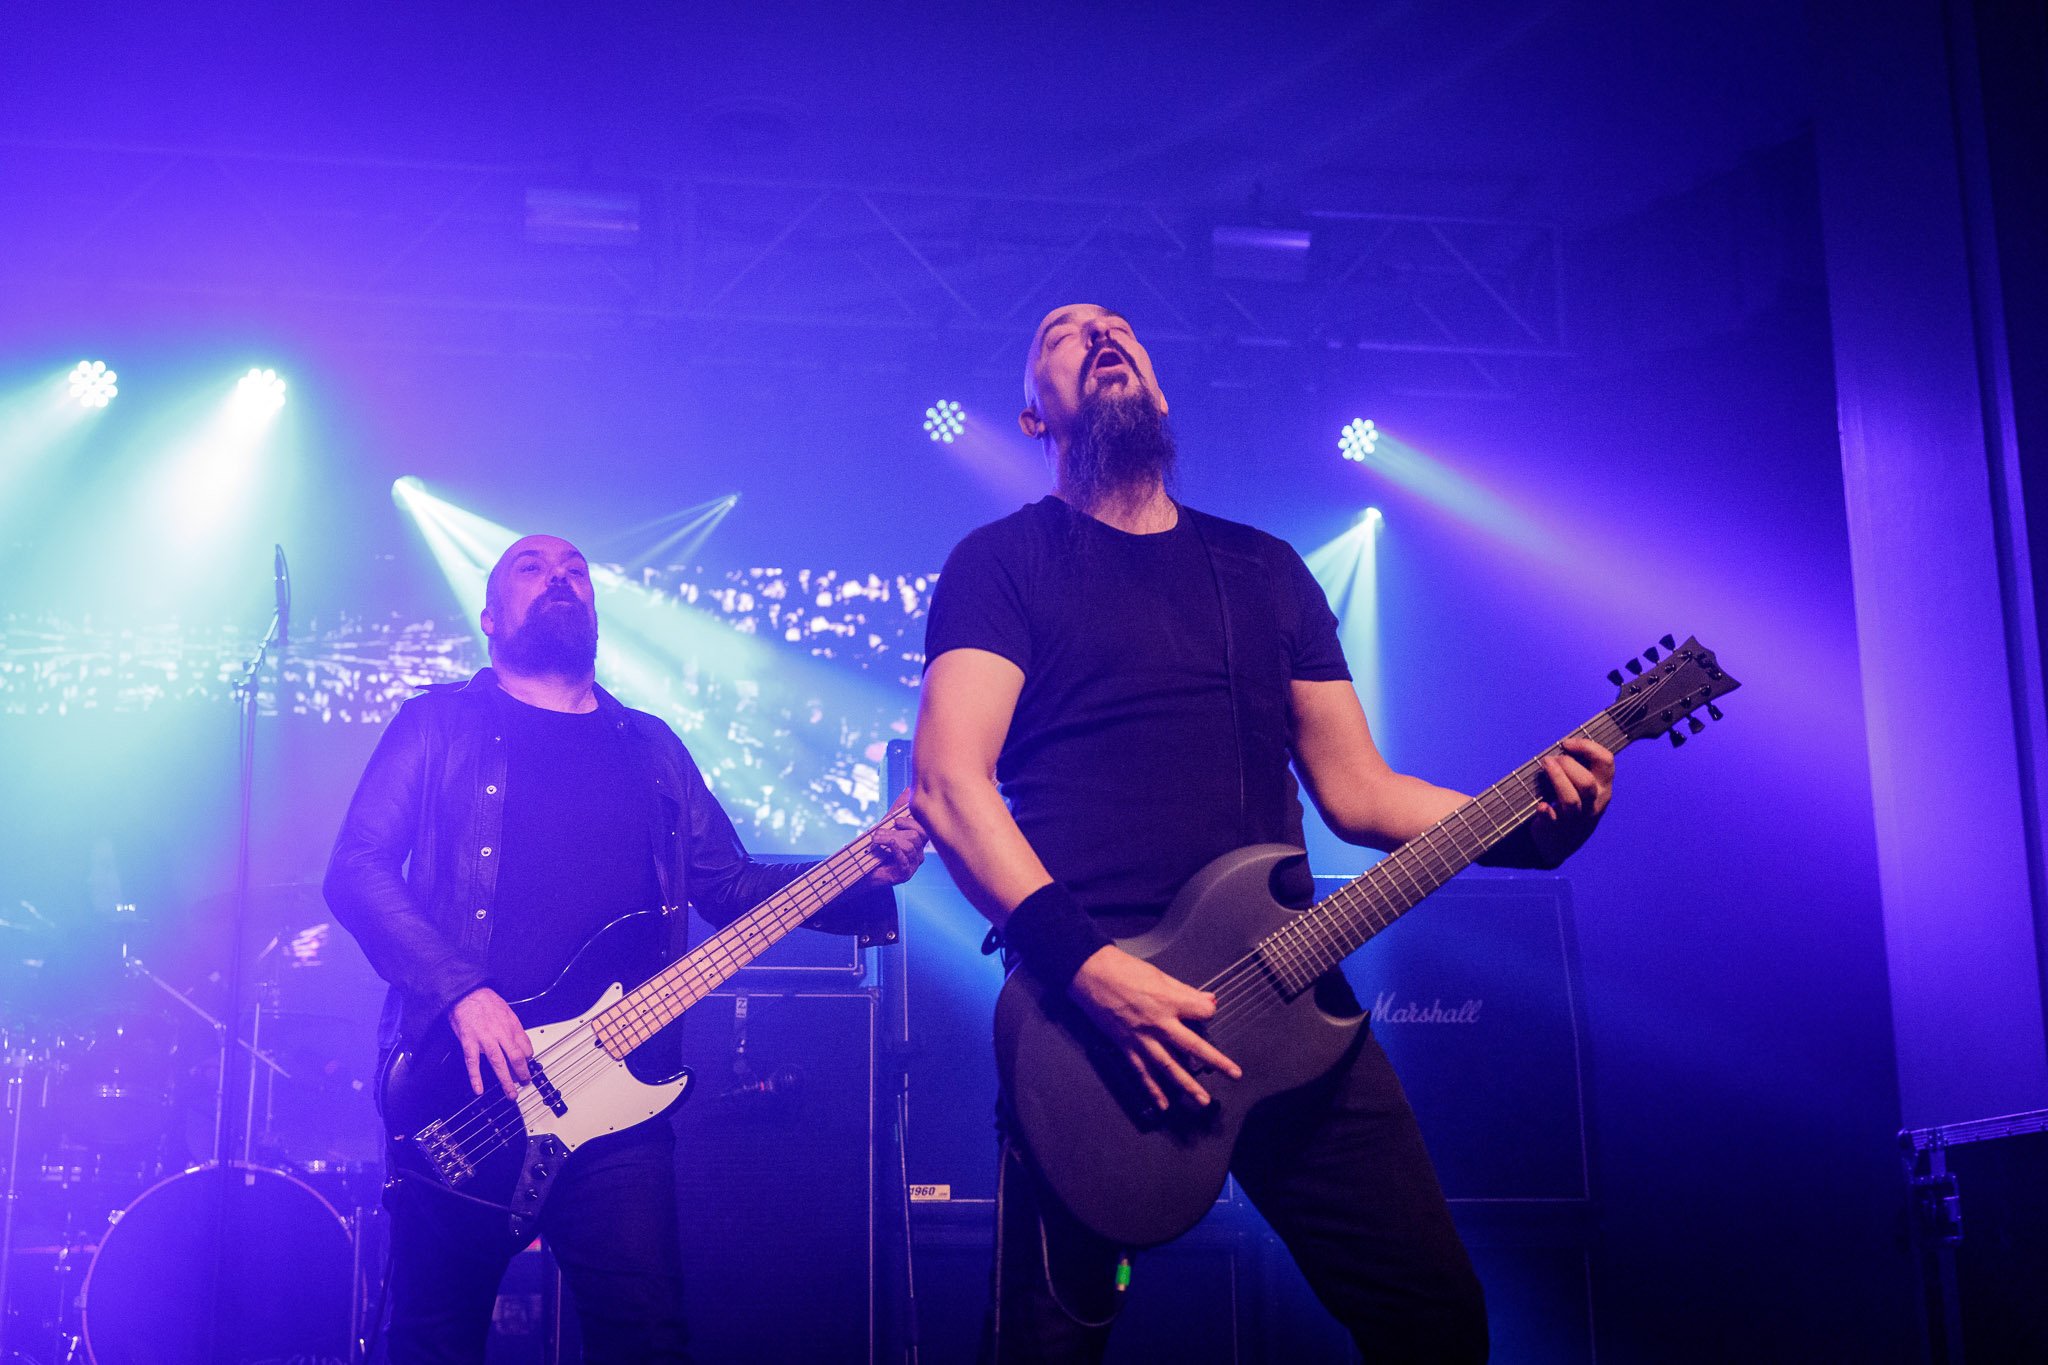 Paradise Lost at the Damnation Festival in Leeds on November 6th